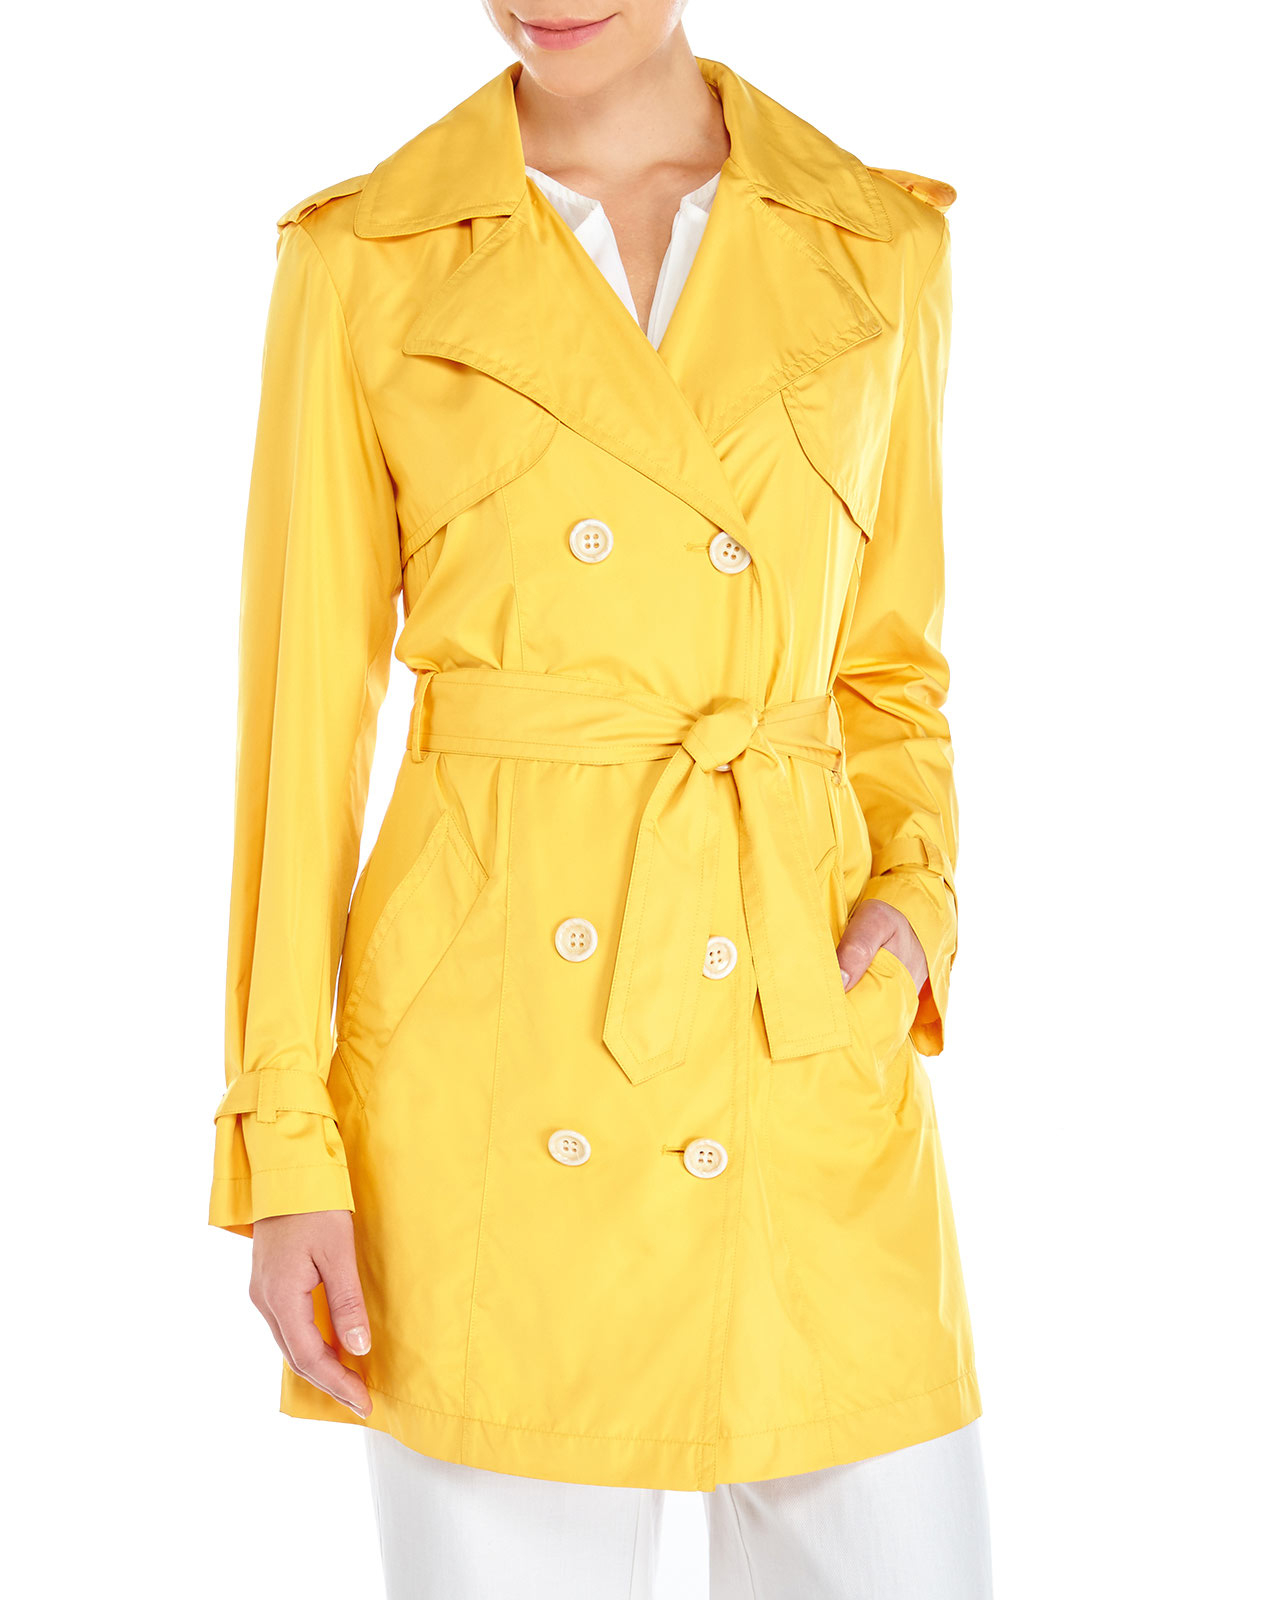 Lafayette 148 new york Marigold Double-Breasted Belted Trench Coat in ...